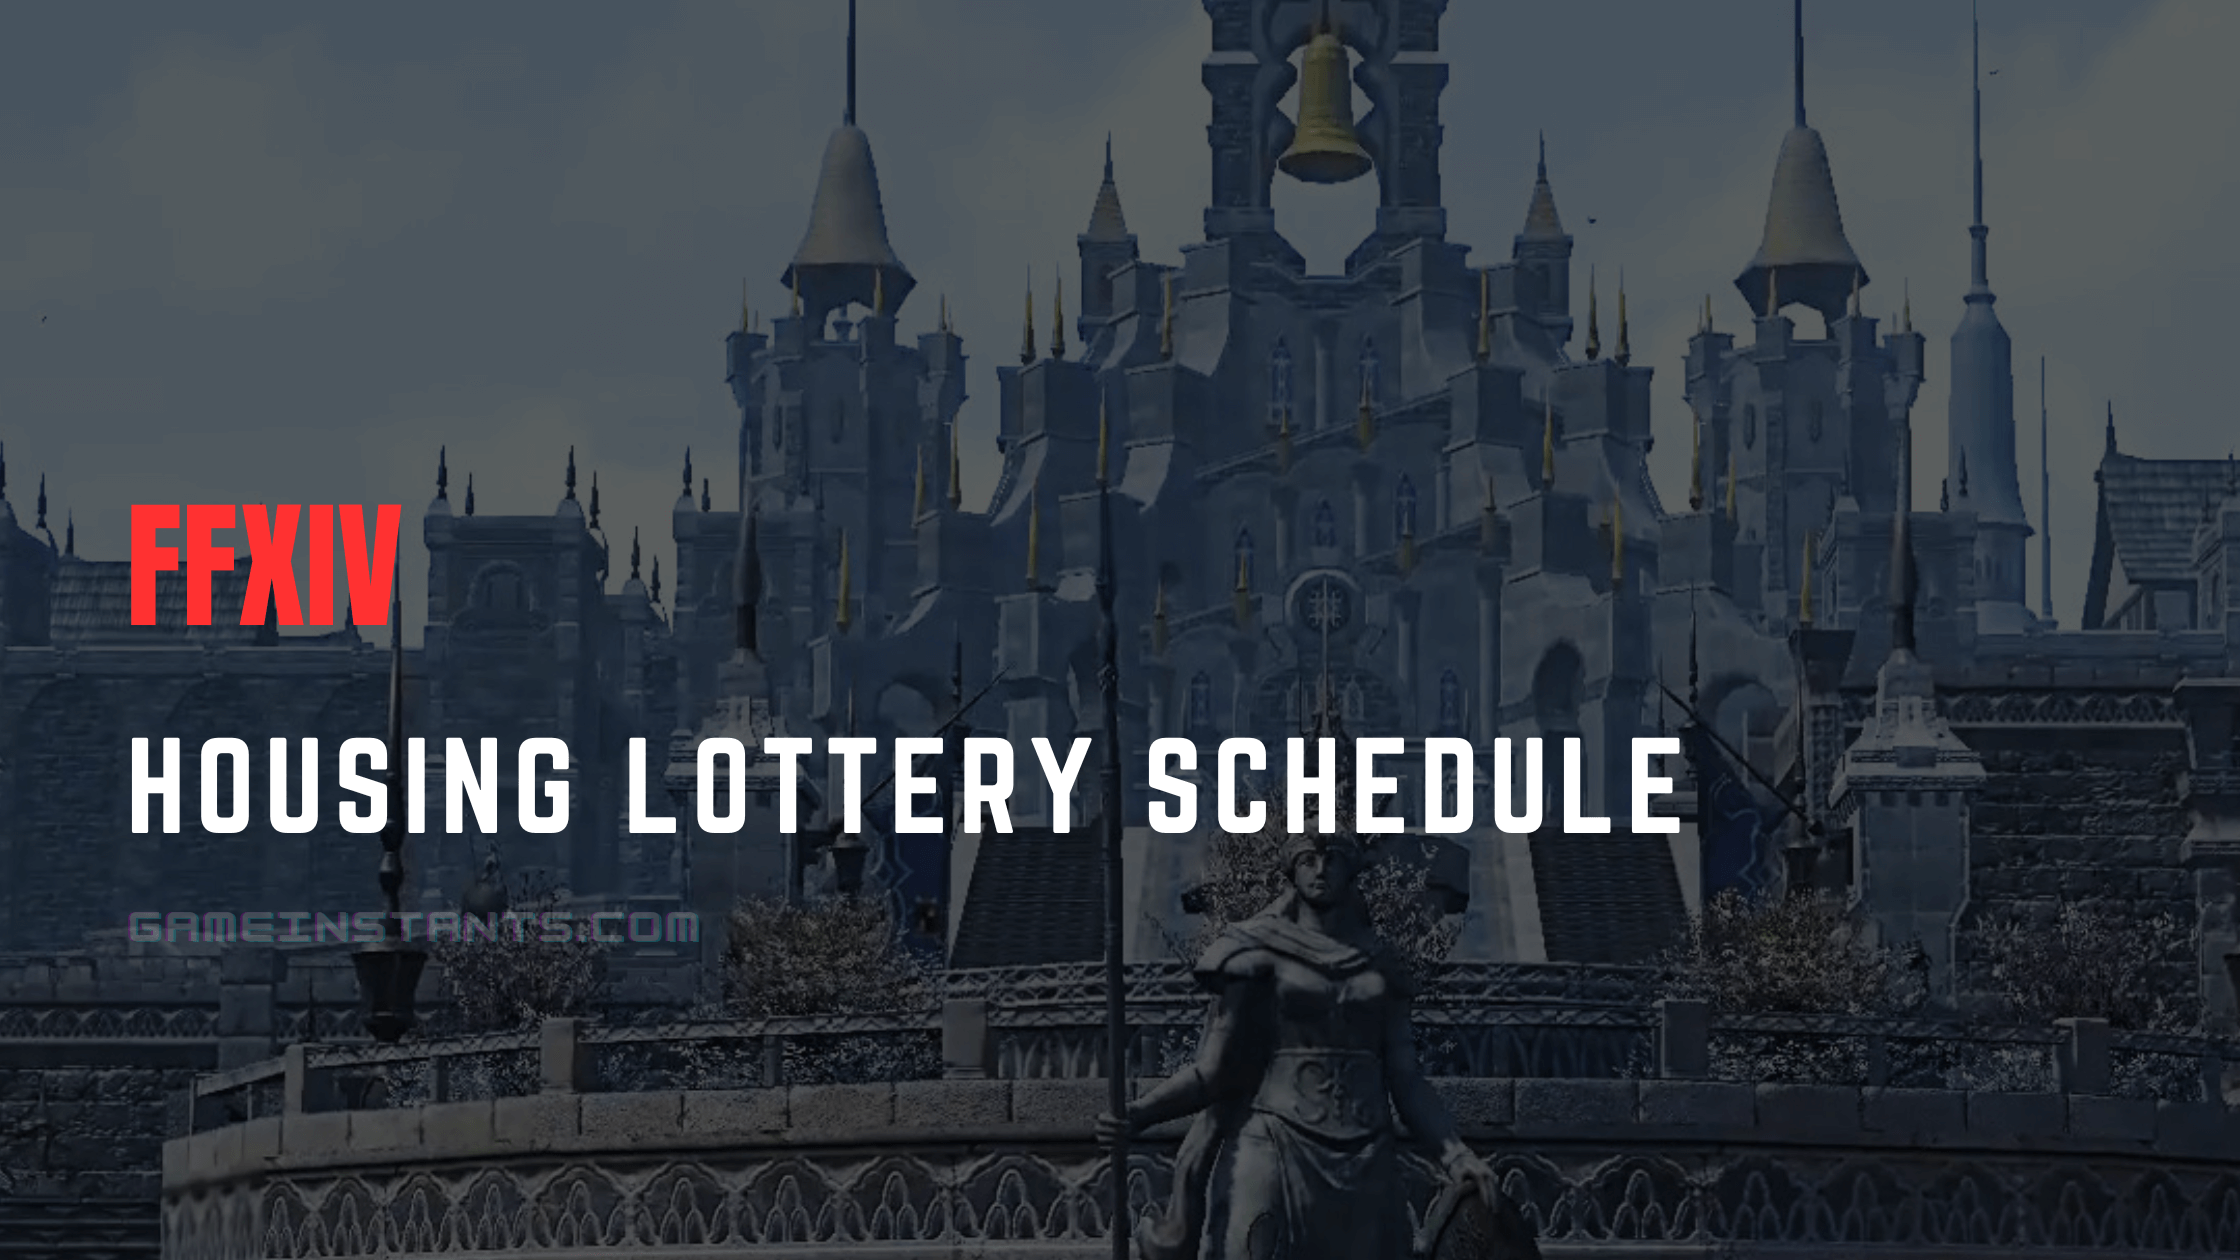 ffxiv housing lottery schedule